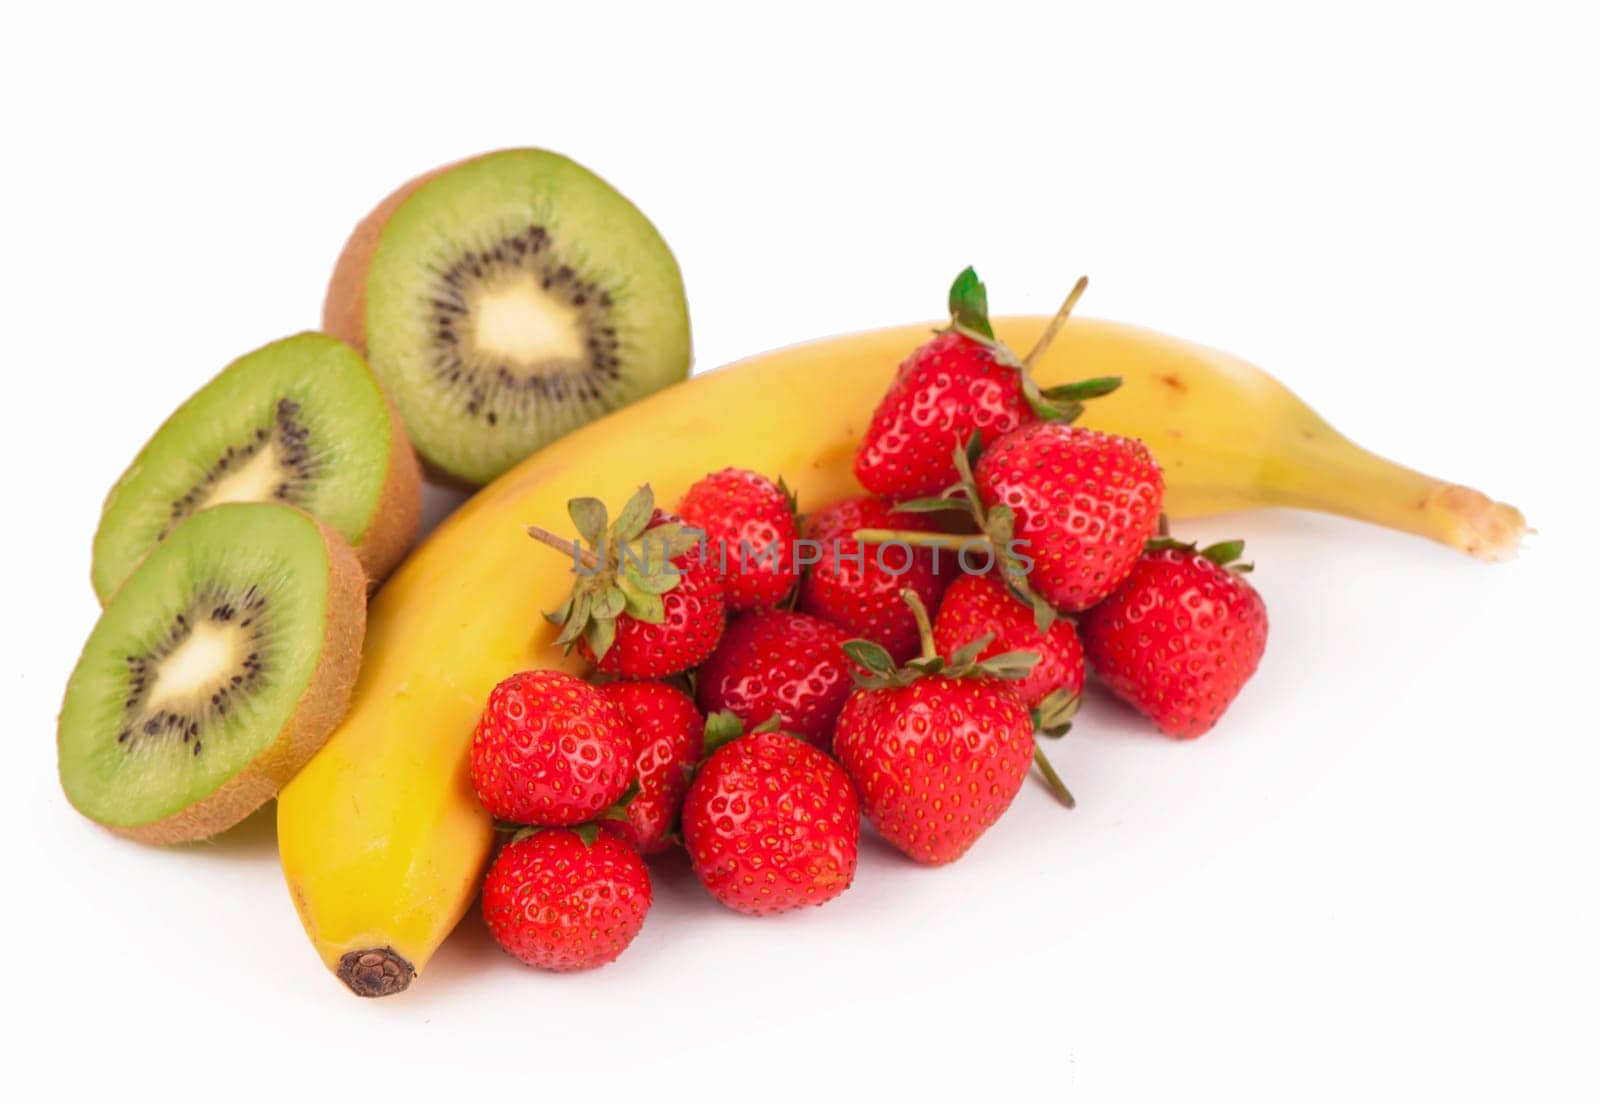 Bananas, kiwi and strawberry lose up isolated on a white background by aprilphoto